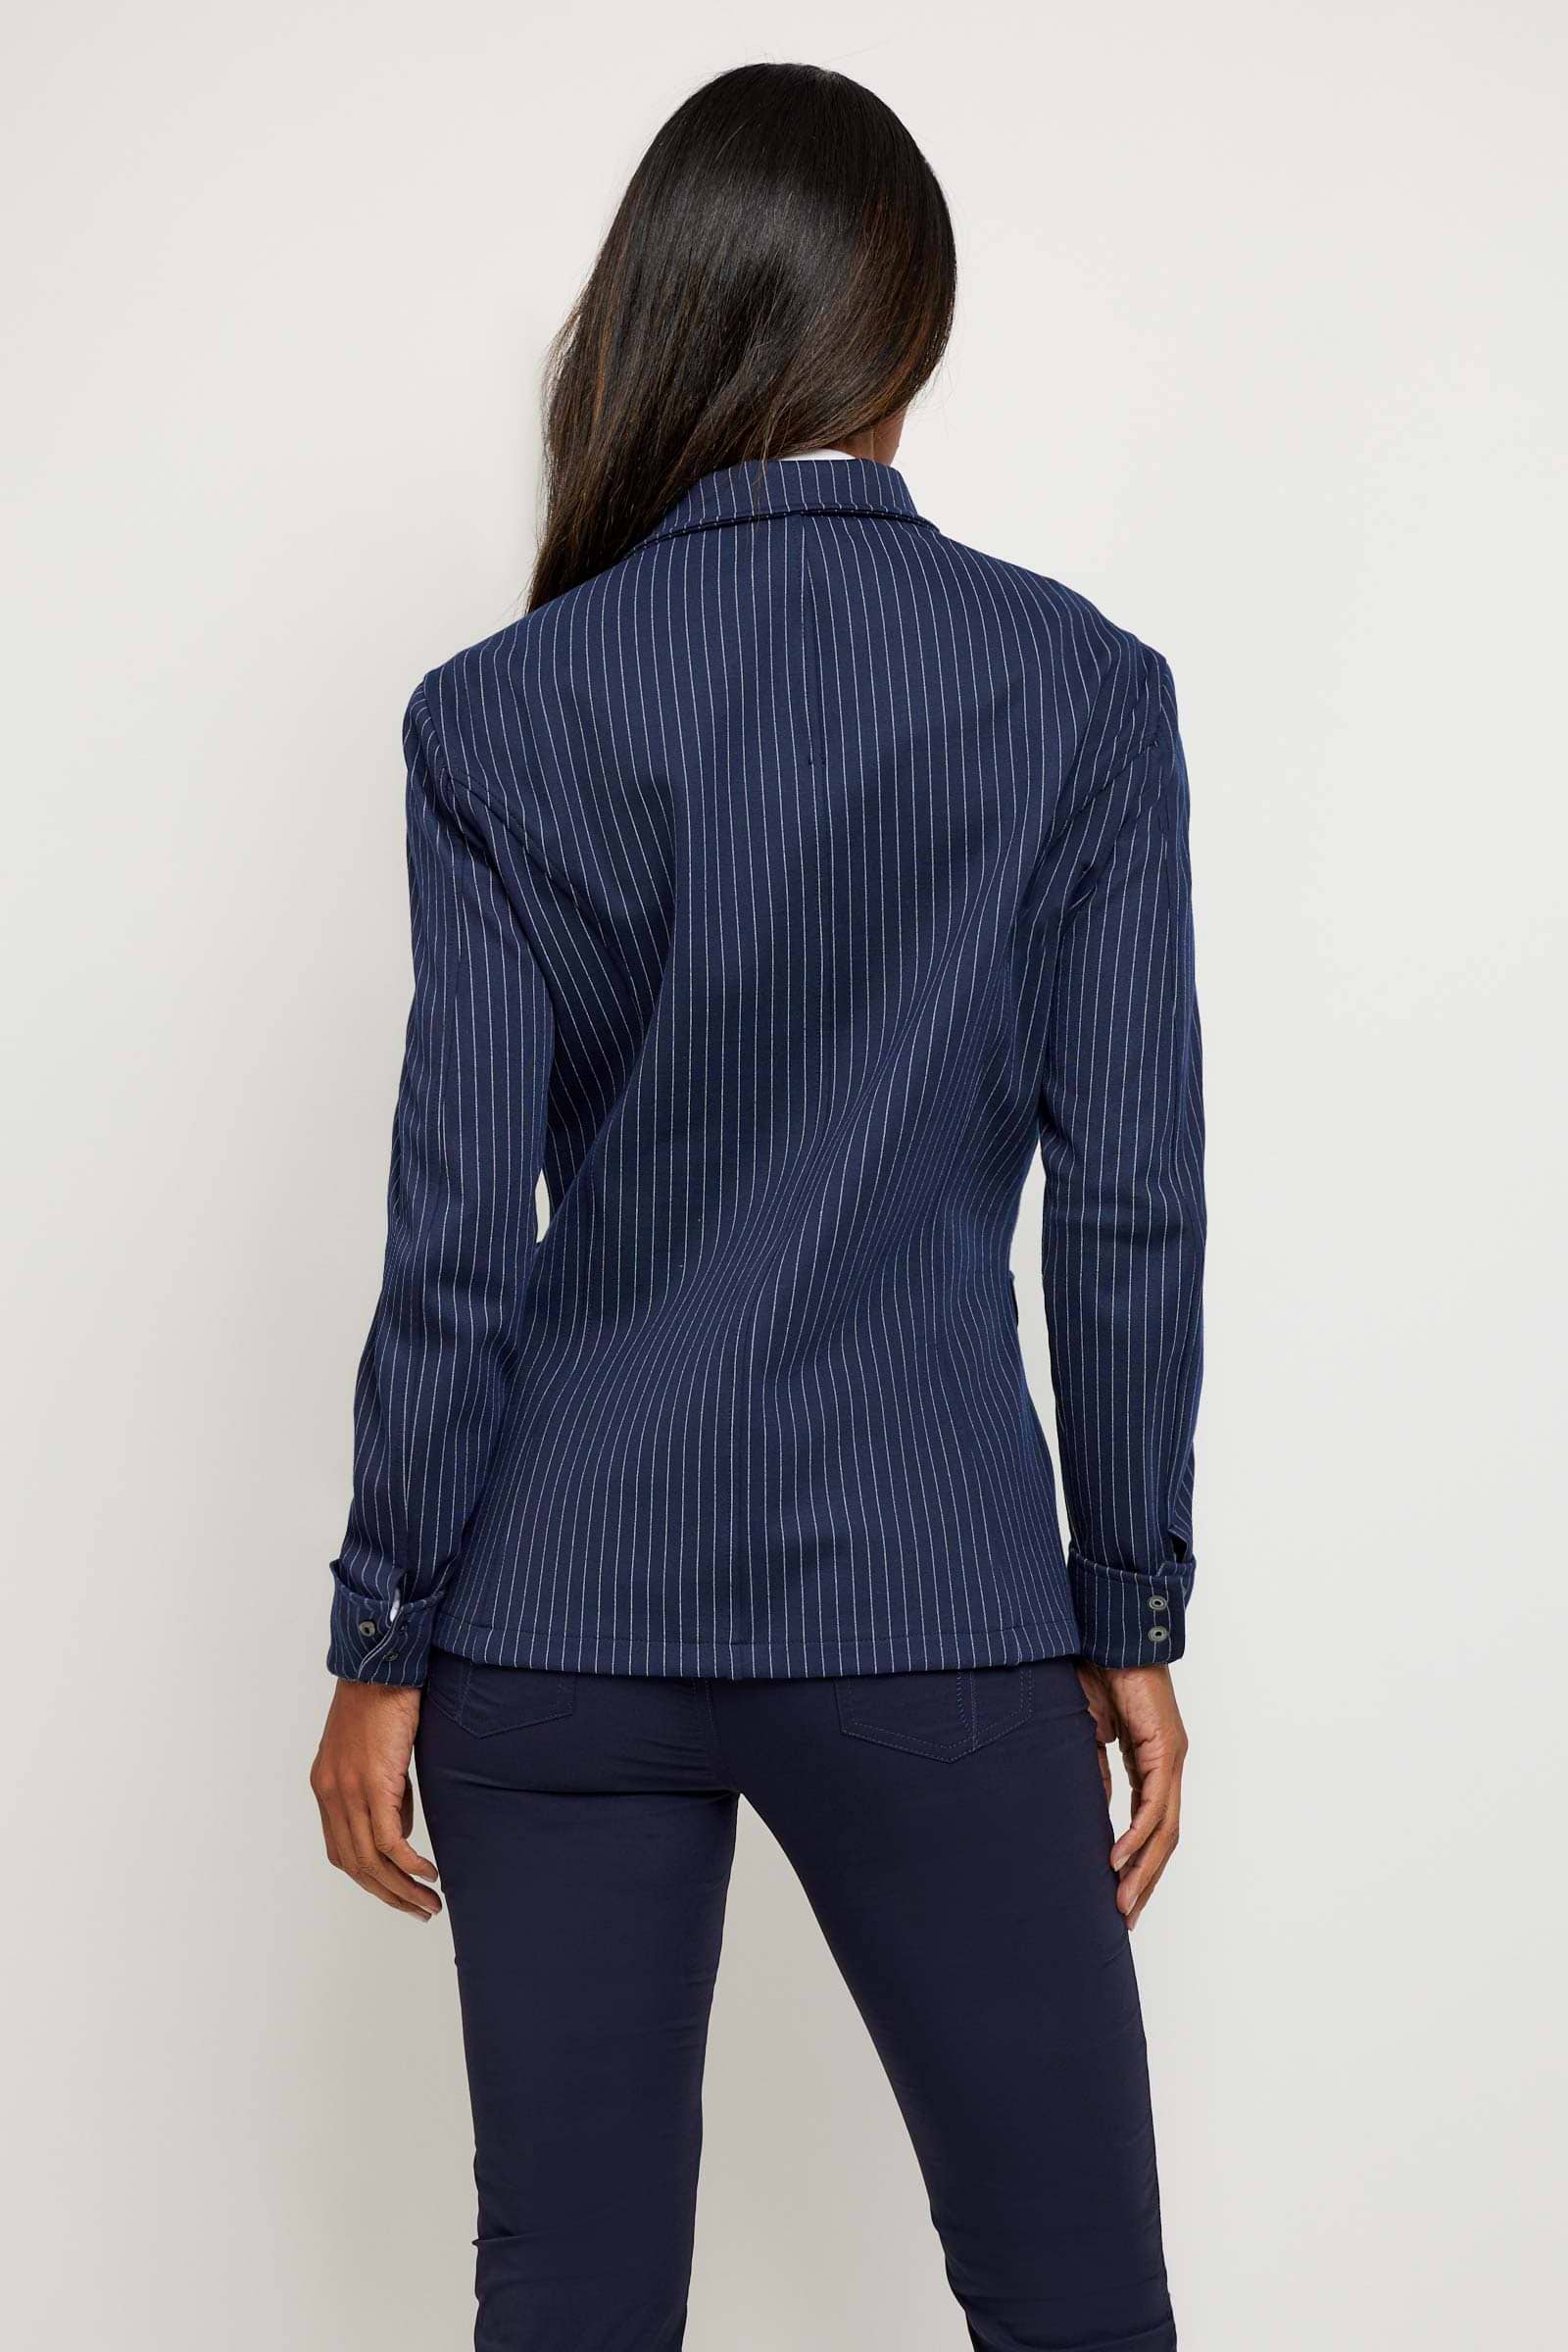 The Best Travel Jacket. Woman Showing the Back Profile of a Lucia Jacket in Navy/White.